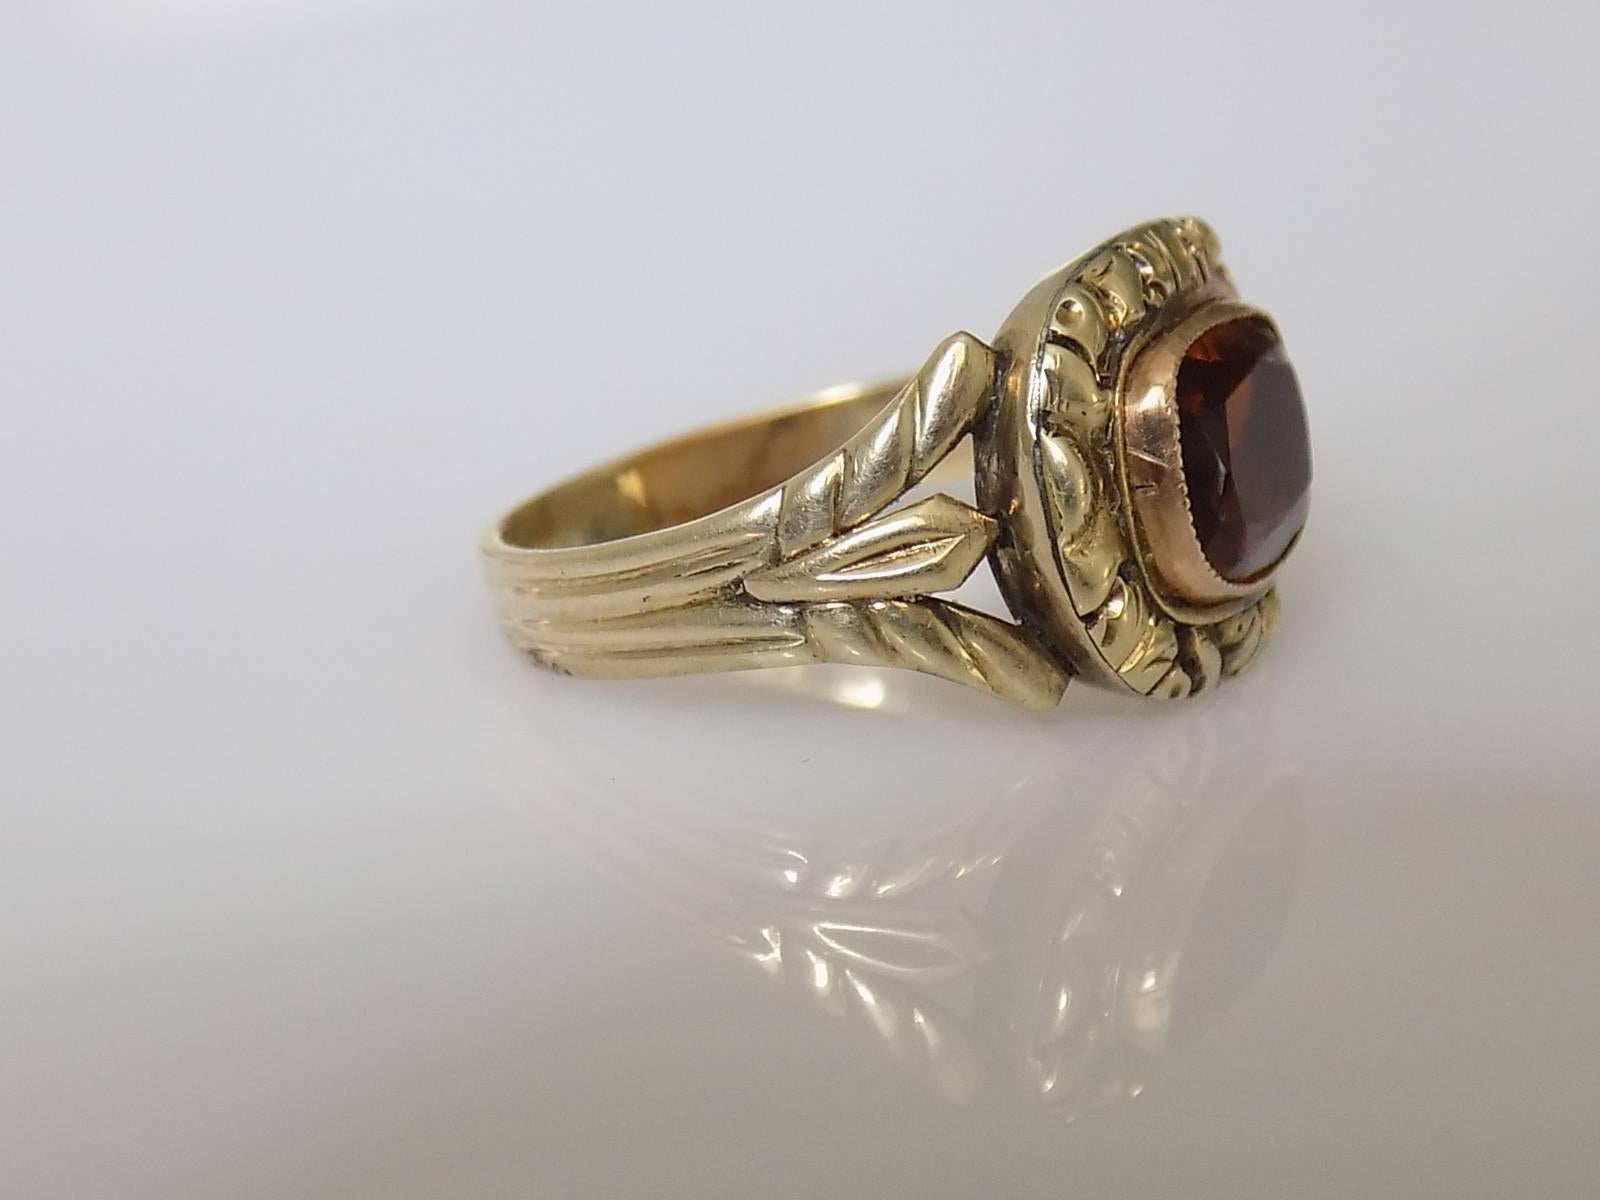 An Antique Georgian c.1800 Hessonite Garnet Paste solitaire ring. The Paste in a beautiful, chased gold setting on ridged shank.
Size N UK, 7 US
Height of the face 12mm, width 15mm.
Weight 4.2gr.
Unmarked, tested 9 Carat Gold.
Ring in excellent